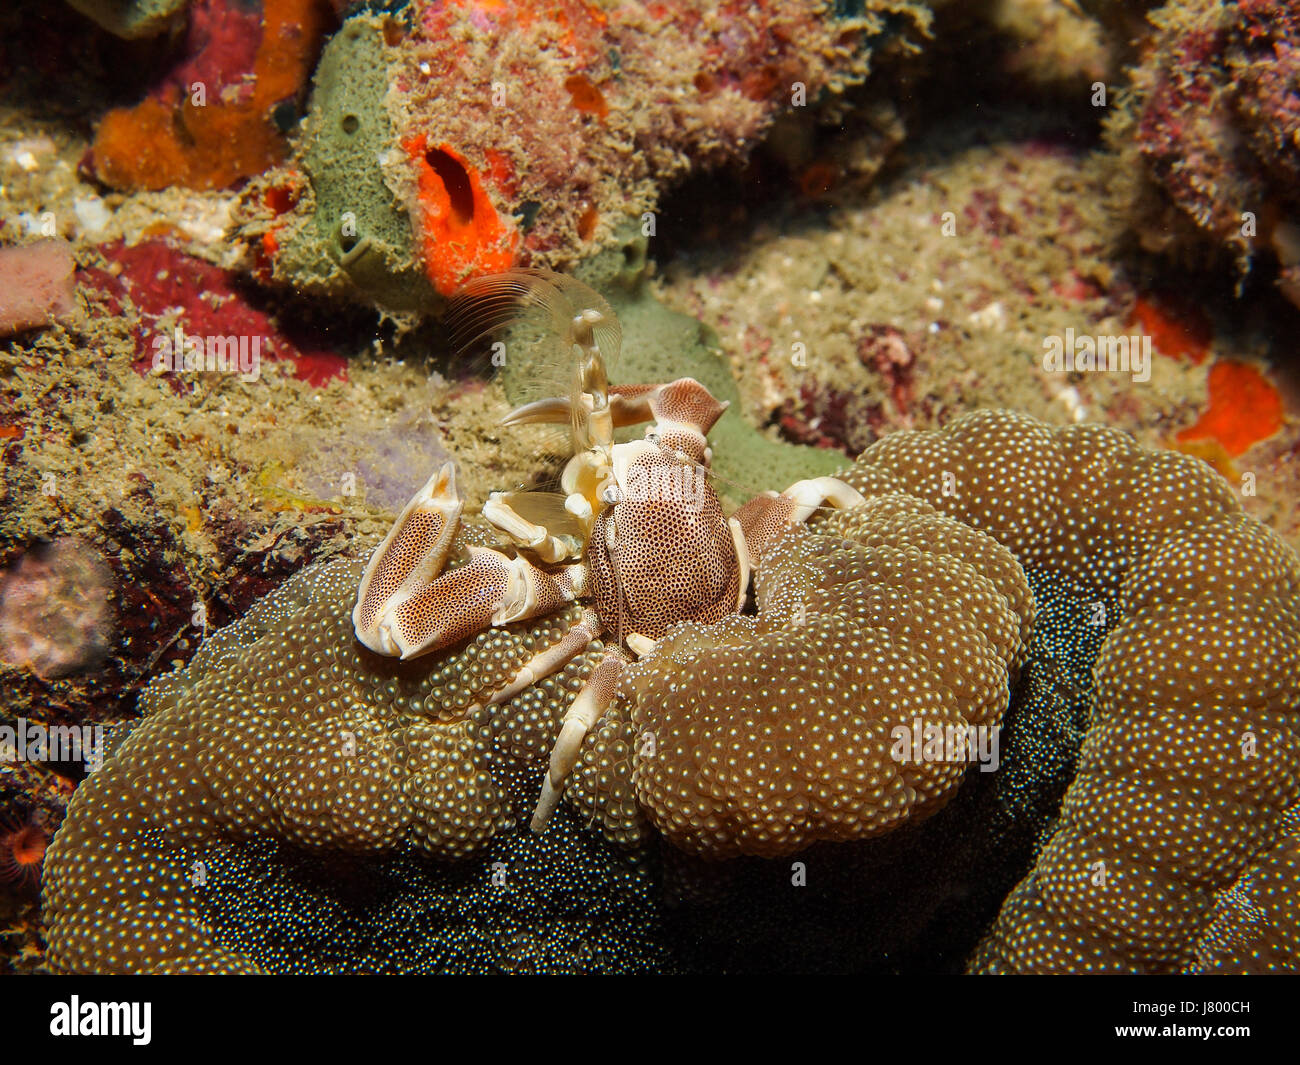 Underwater picture of Anemone Crab (Neopetrolisthes ohshimai) Stock Photo